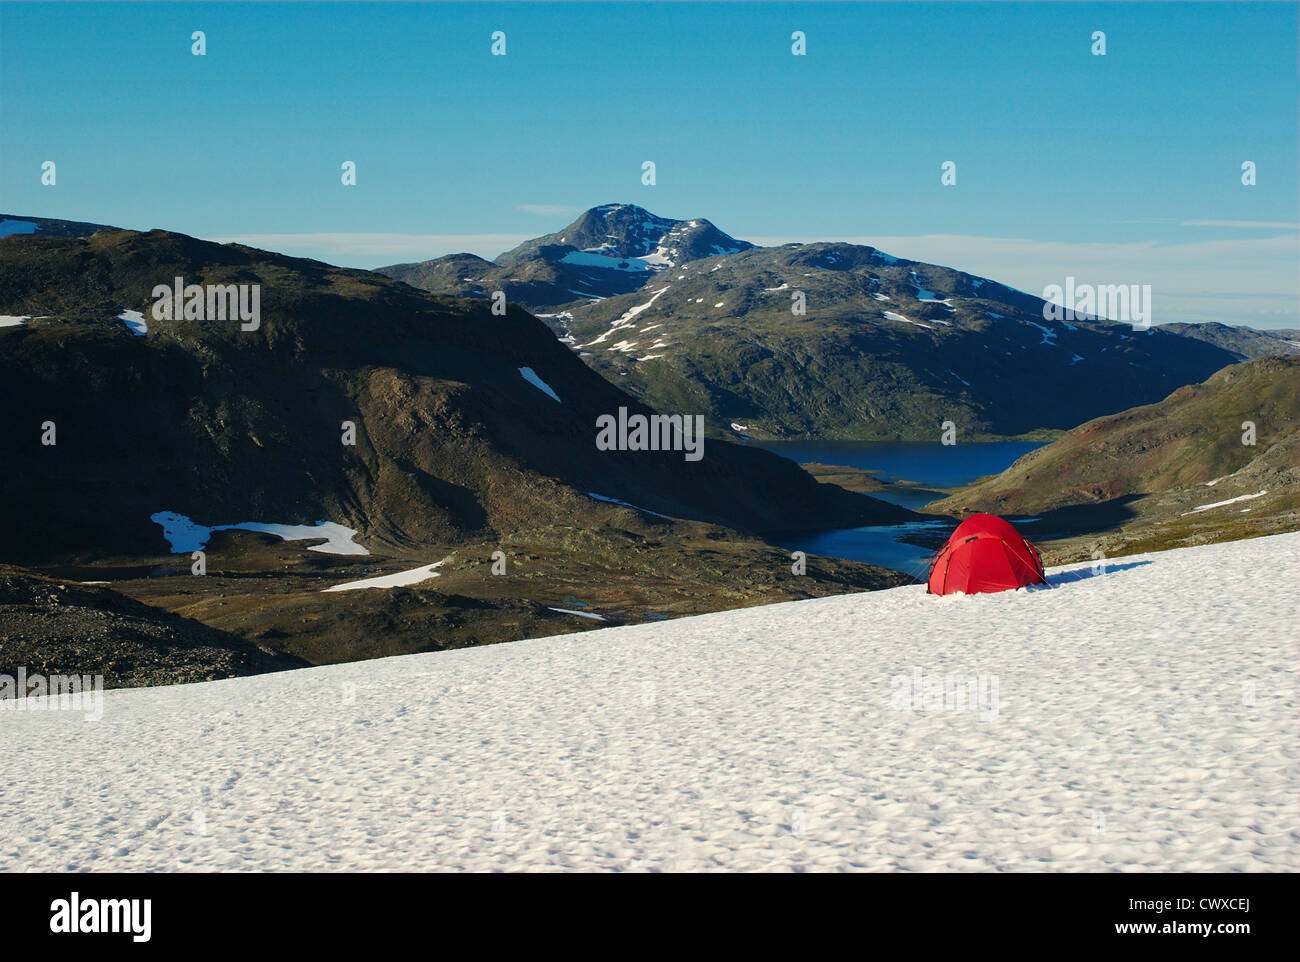 Camping with a red tent on a snowfield with a view on mountains and lakes along the Nordkalottleden, Scandinavia Stock Photo